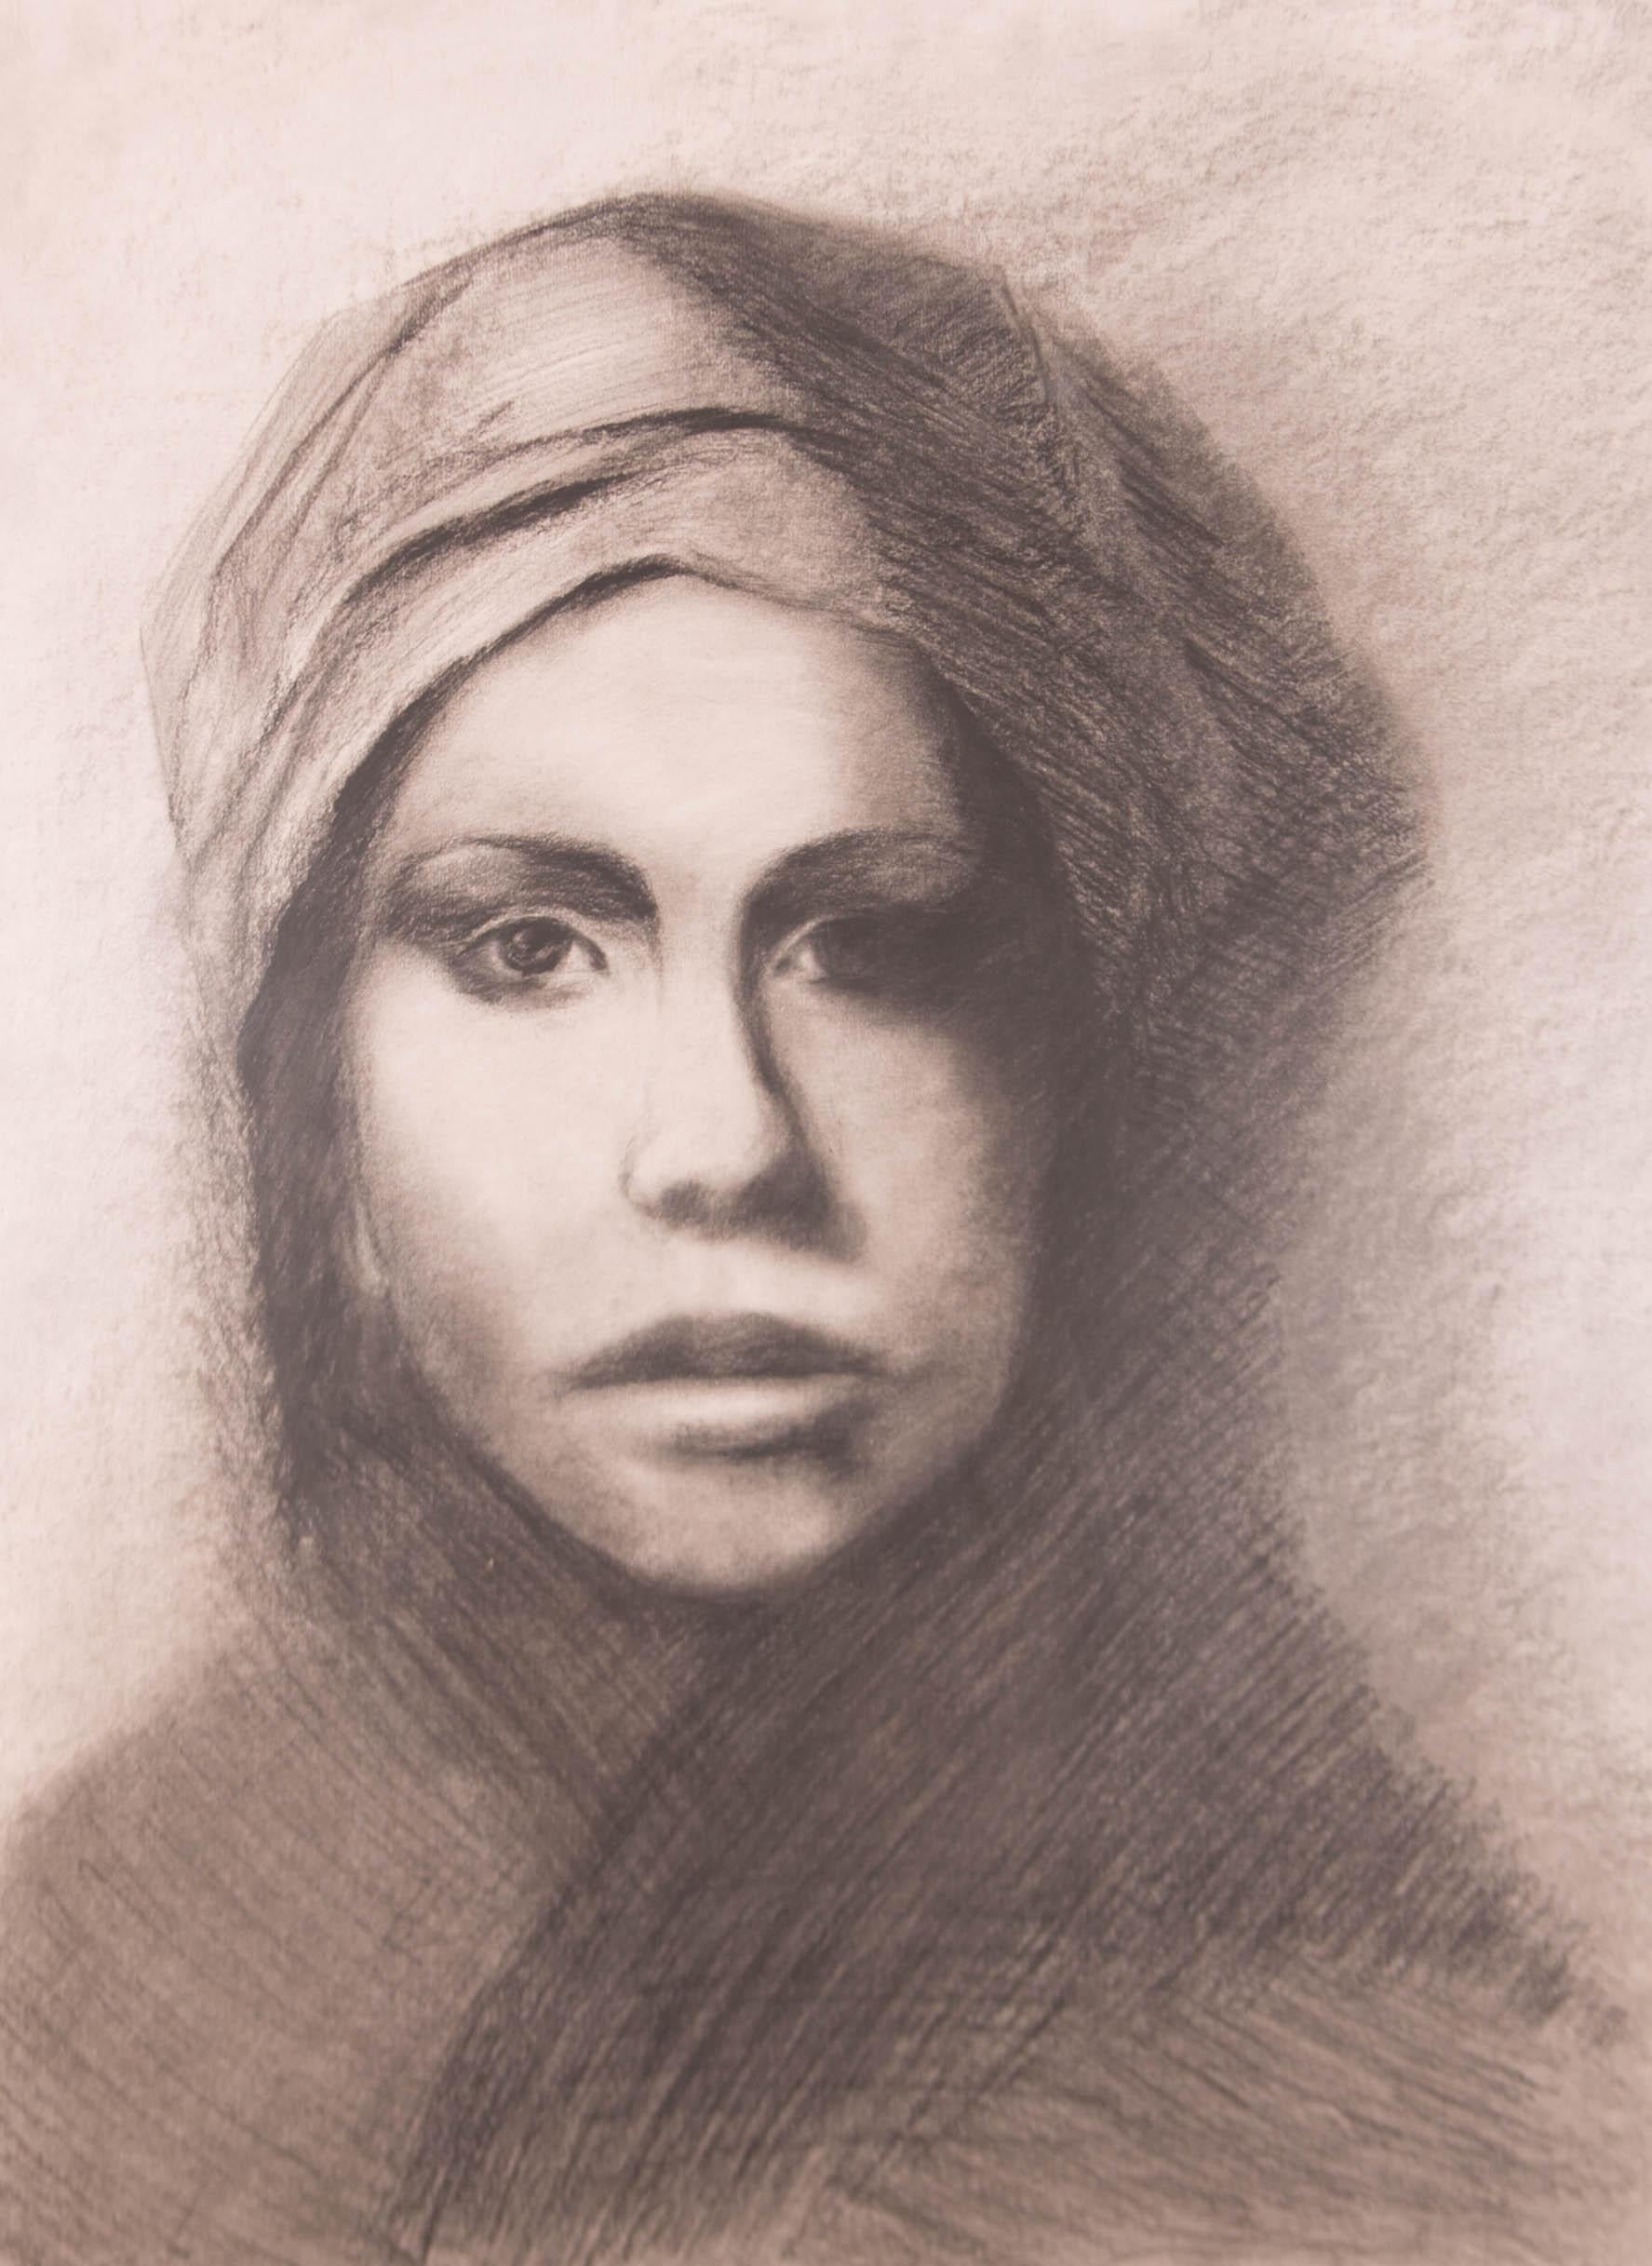 An intense charcoal portrait of a striking young woman in a headscarf.

The drawing is unsigned and presented in a glazed, black frame with a white mount.

On wove.